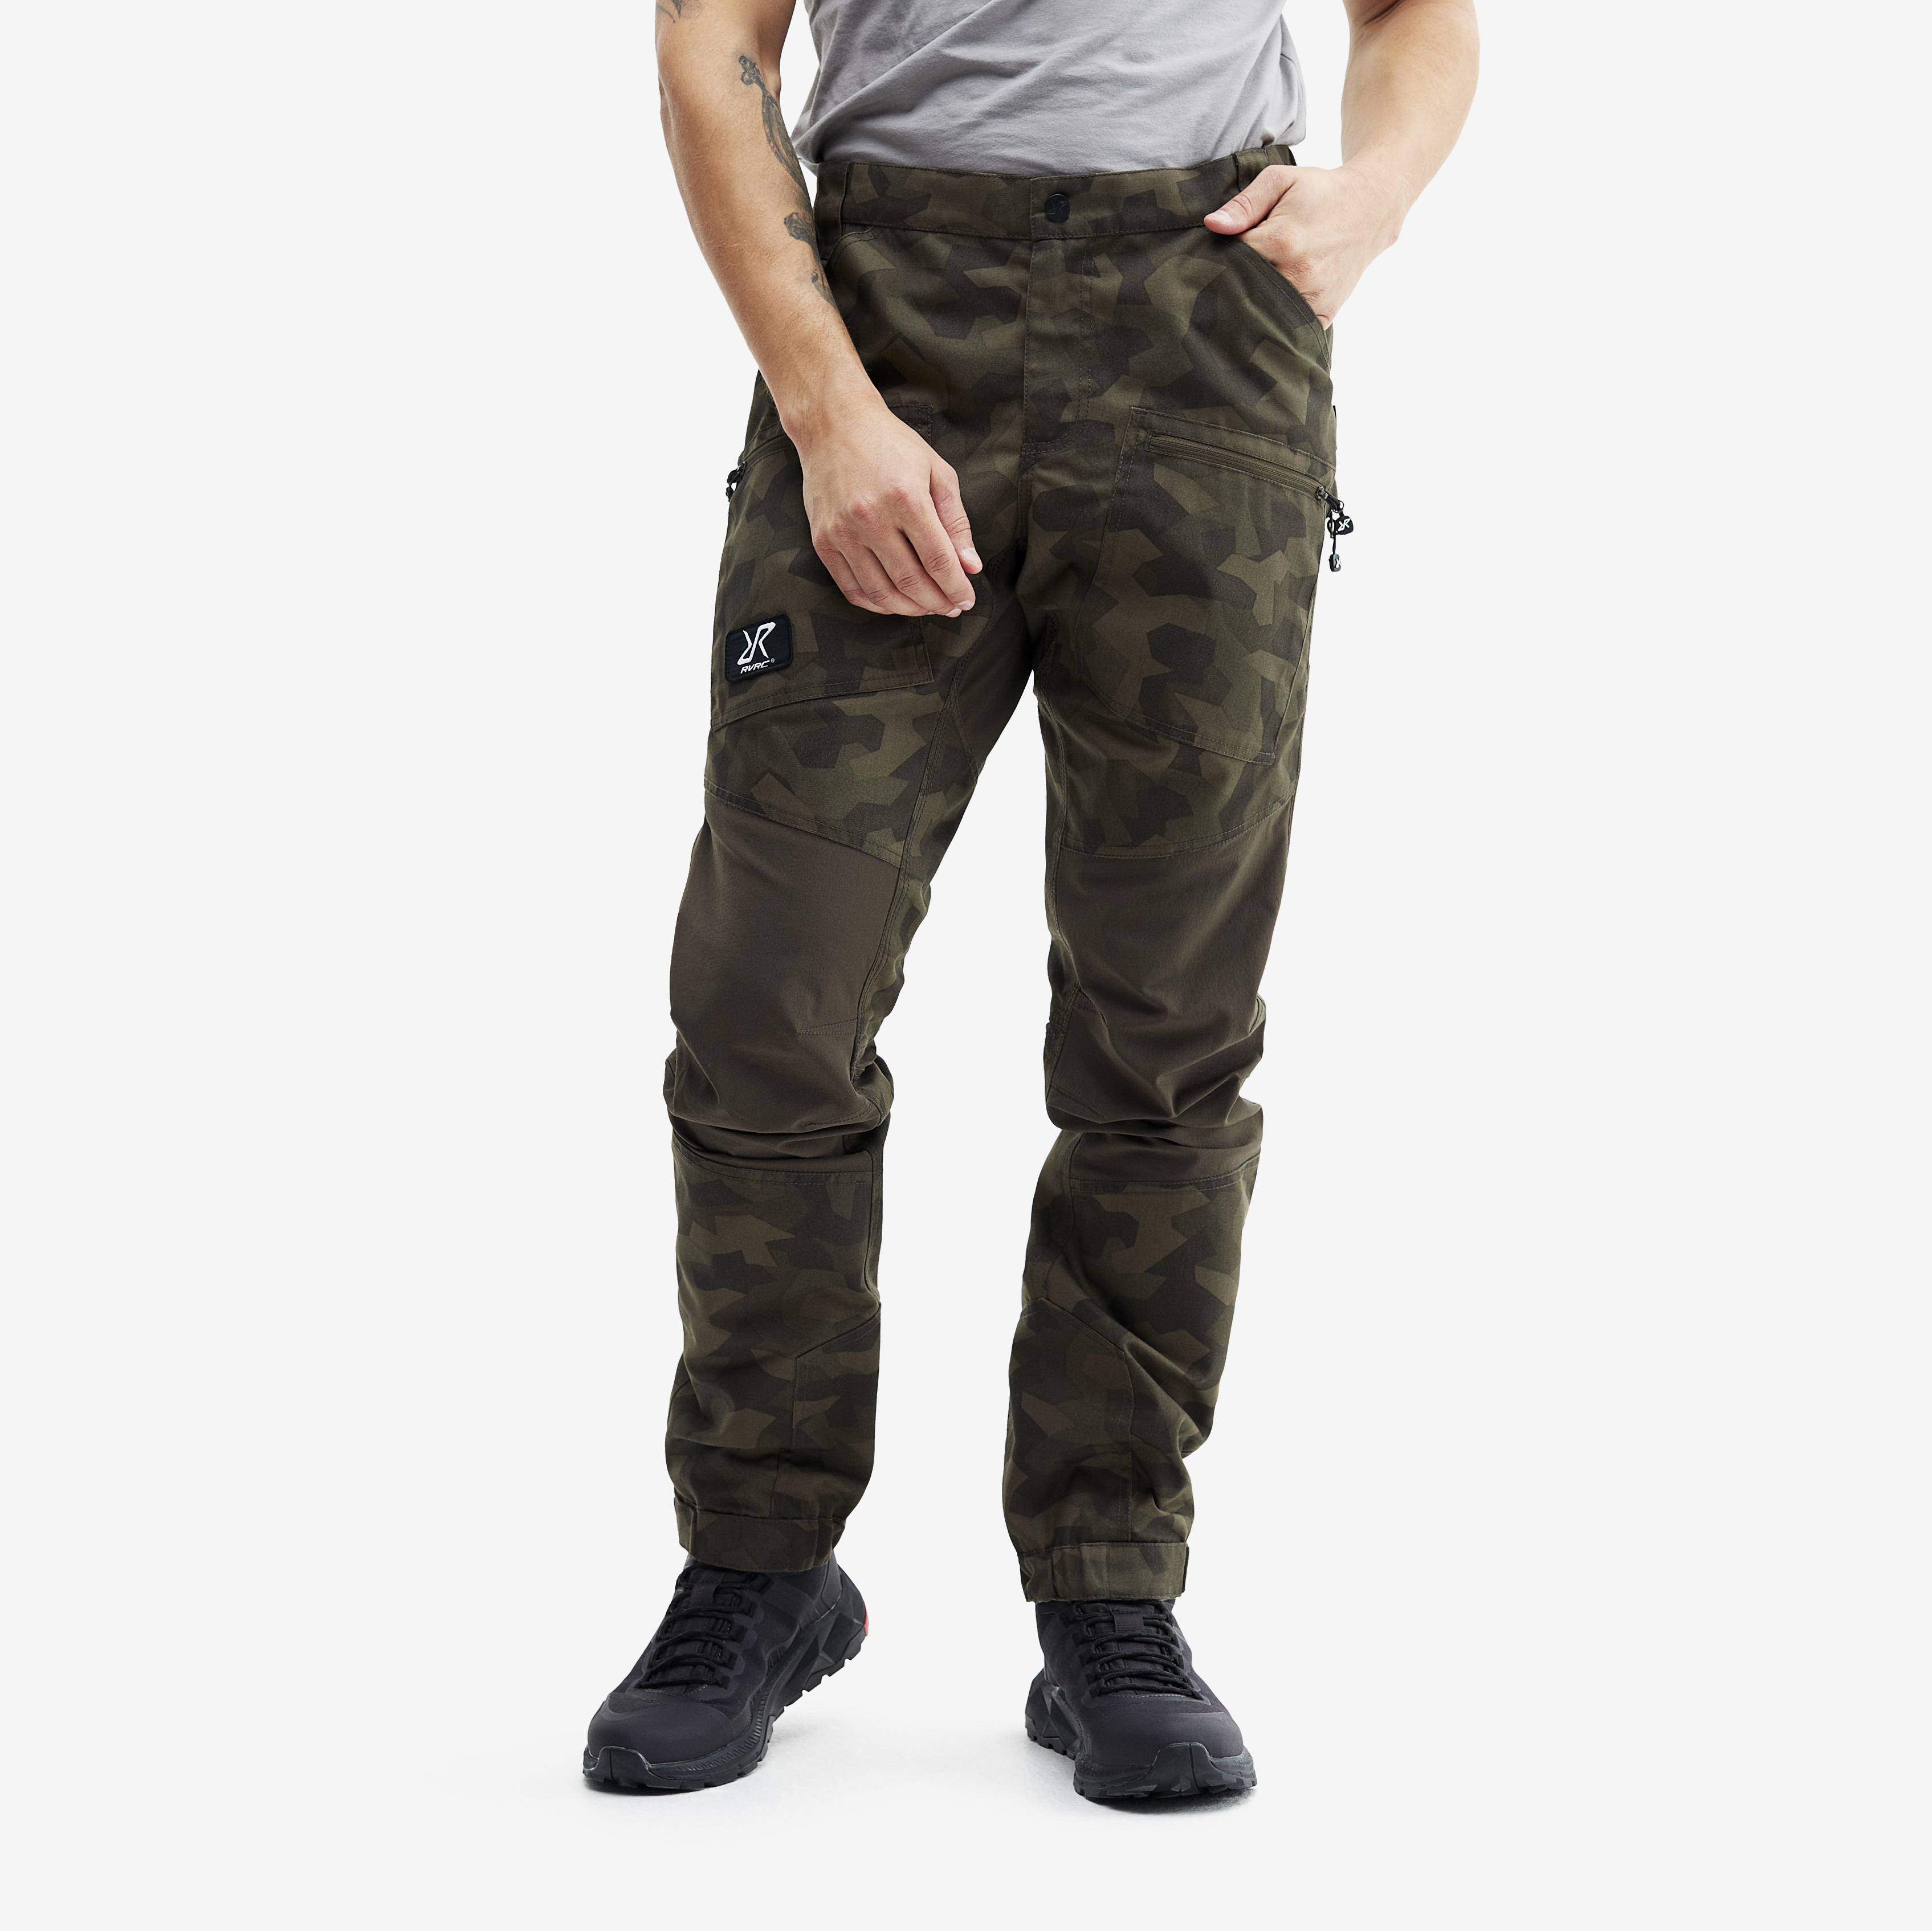 Nordwand Pro Pants Earth Camo Hombres